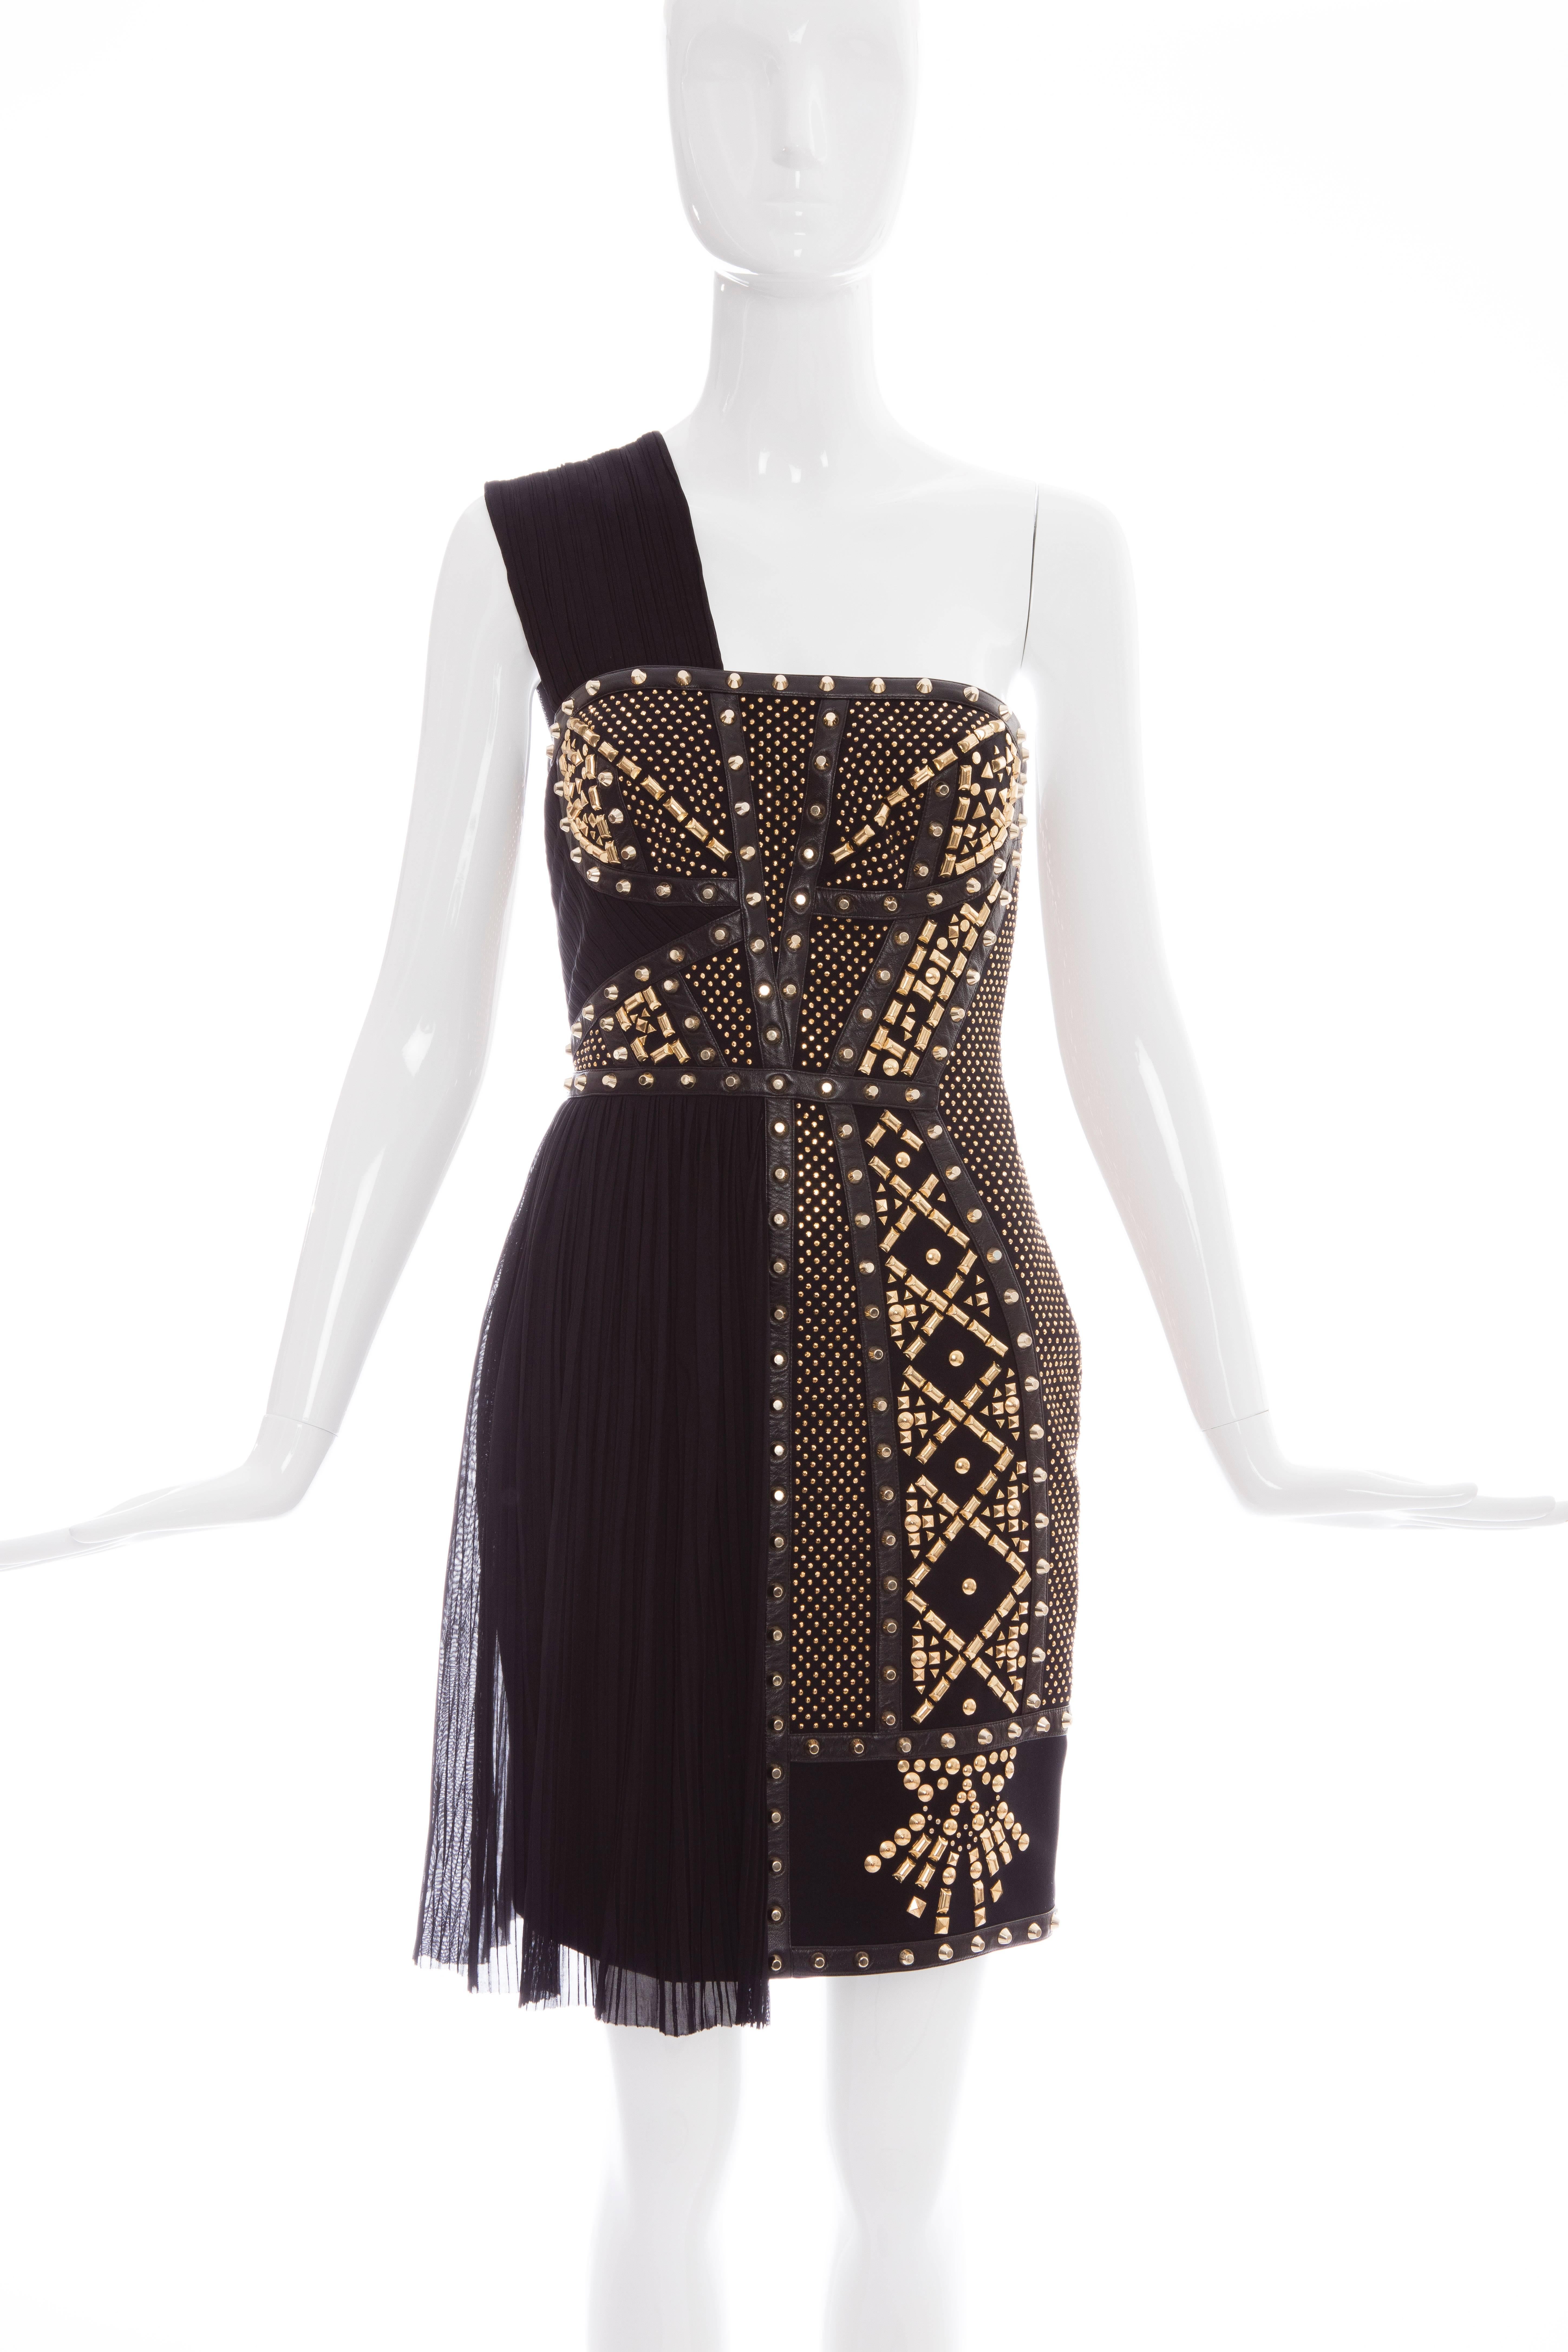  Versace, Spring 2012, one-shoulder dress with leather trim and gold-tone stud geometric embellishment throughout, plisse panel at side skirt and exposed zip closure at center back.

IT. 38
US. 2

Bust 27”, Waist 24”, Hip 34”, Length